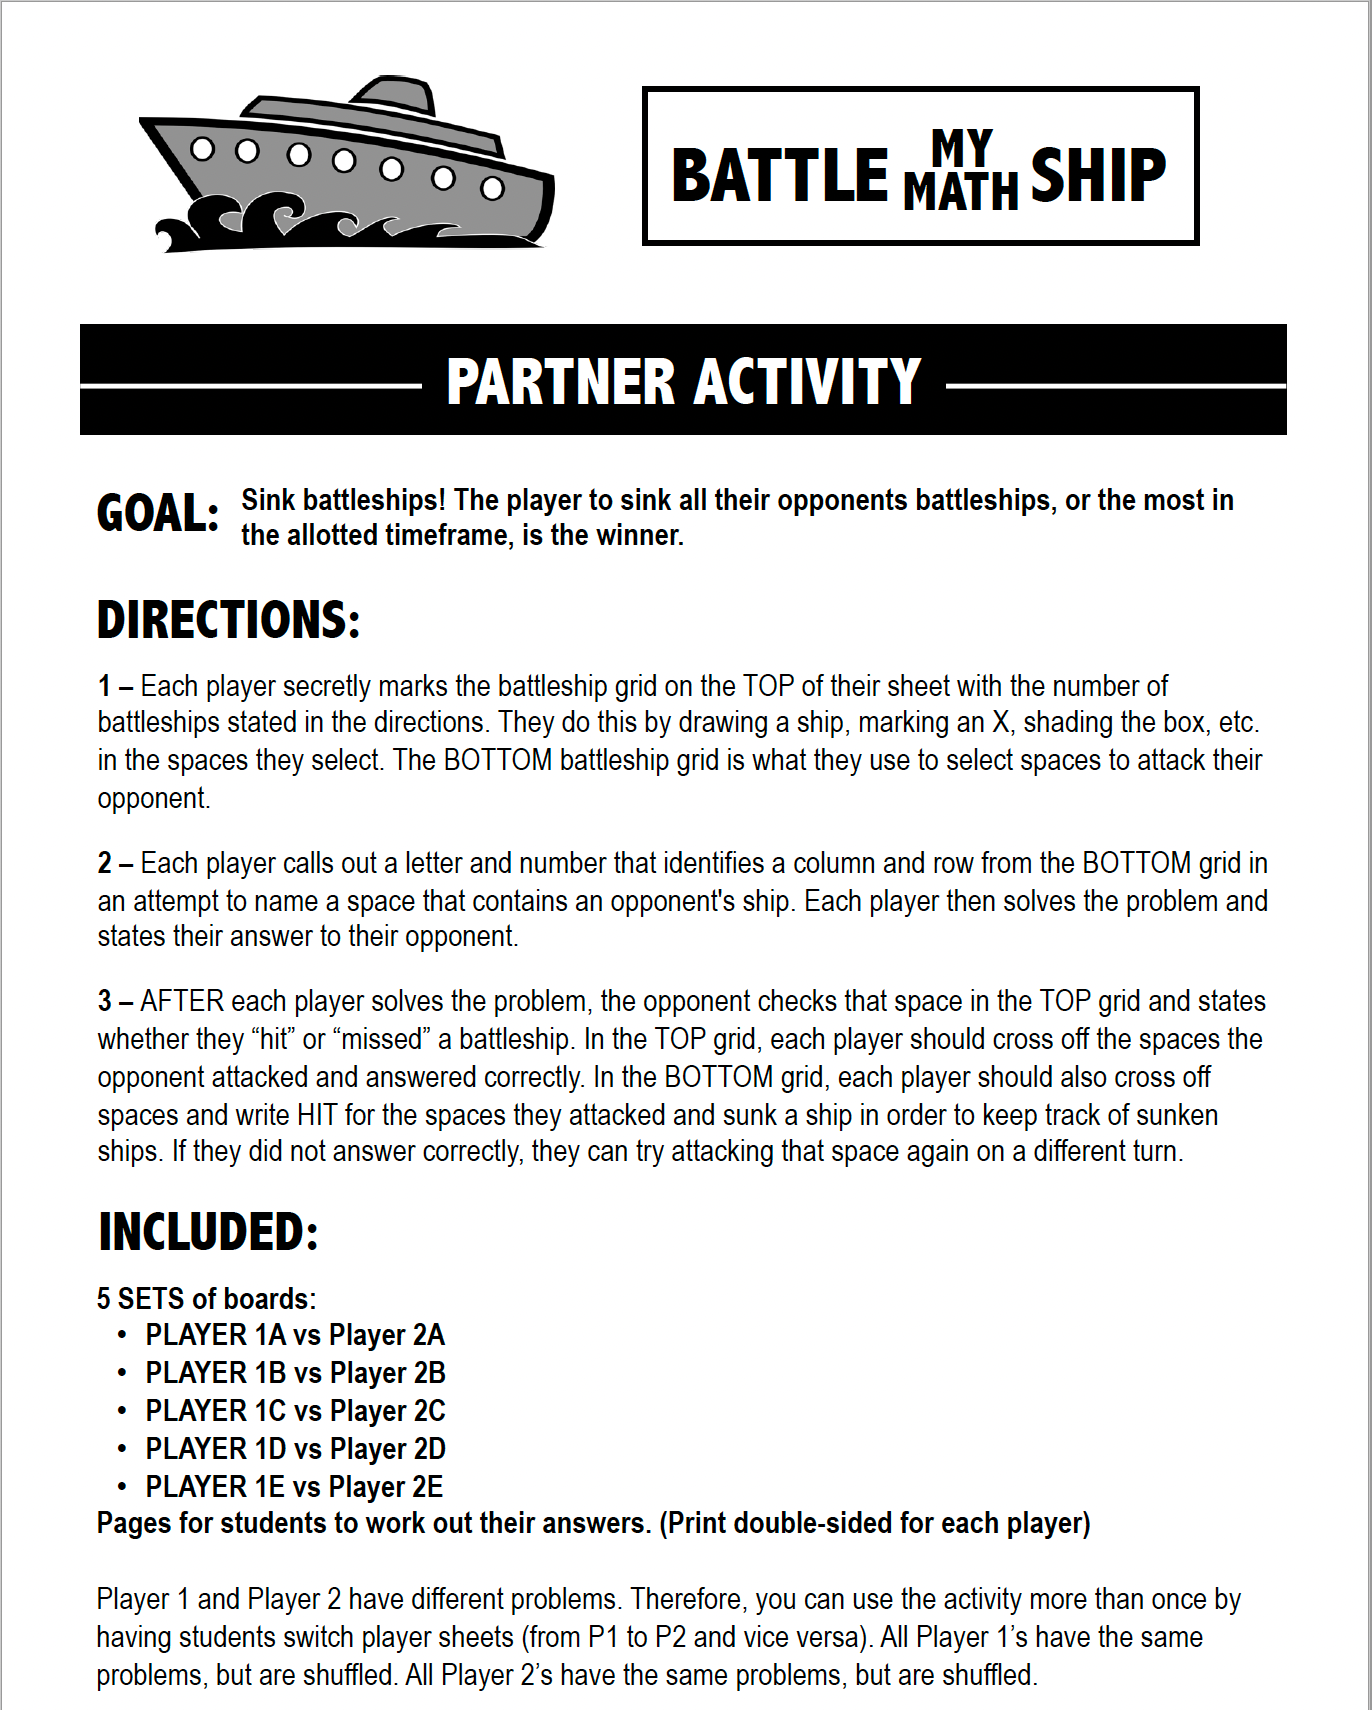 Evaluate Functions Activity | Battle My Math Ship Game | Print and Digital